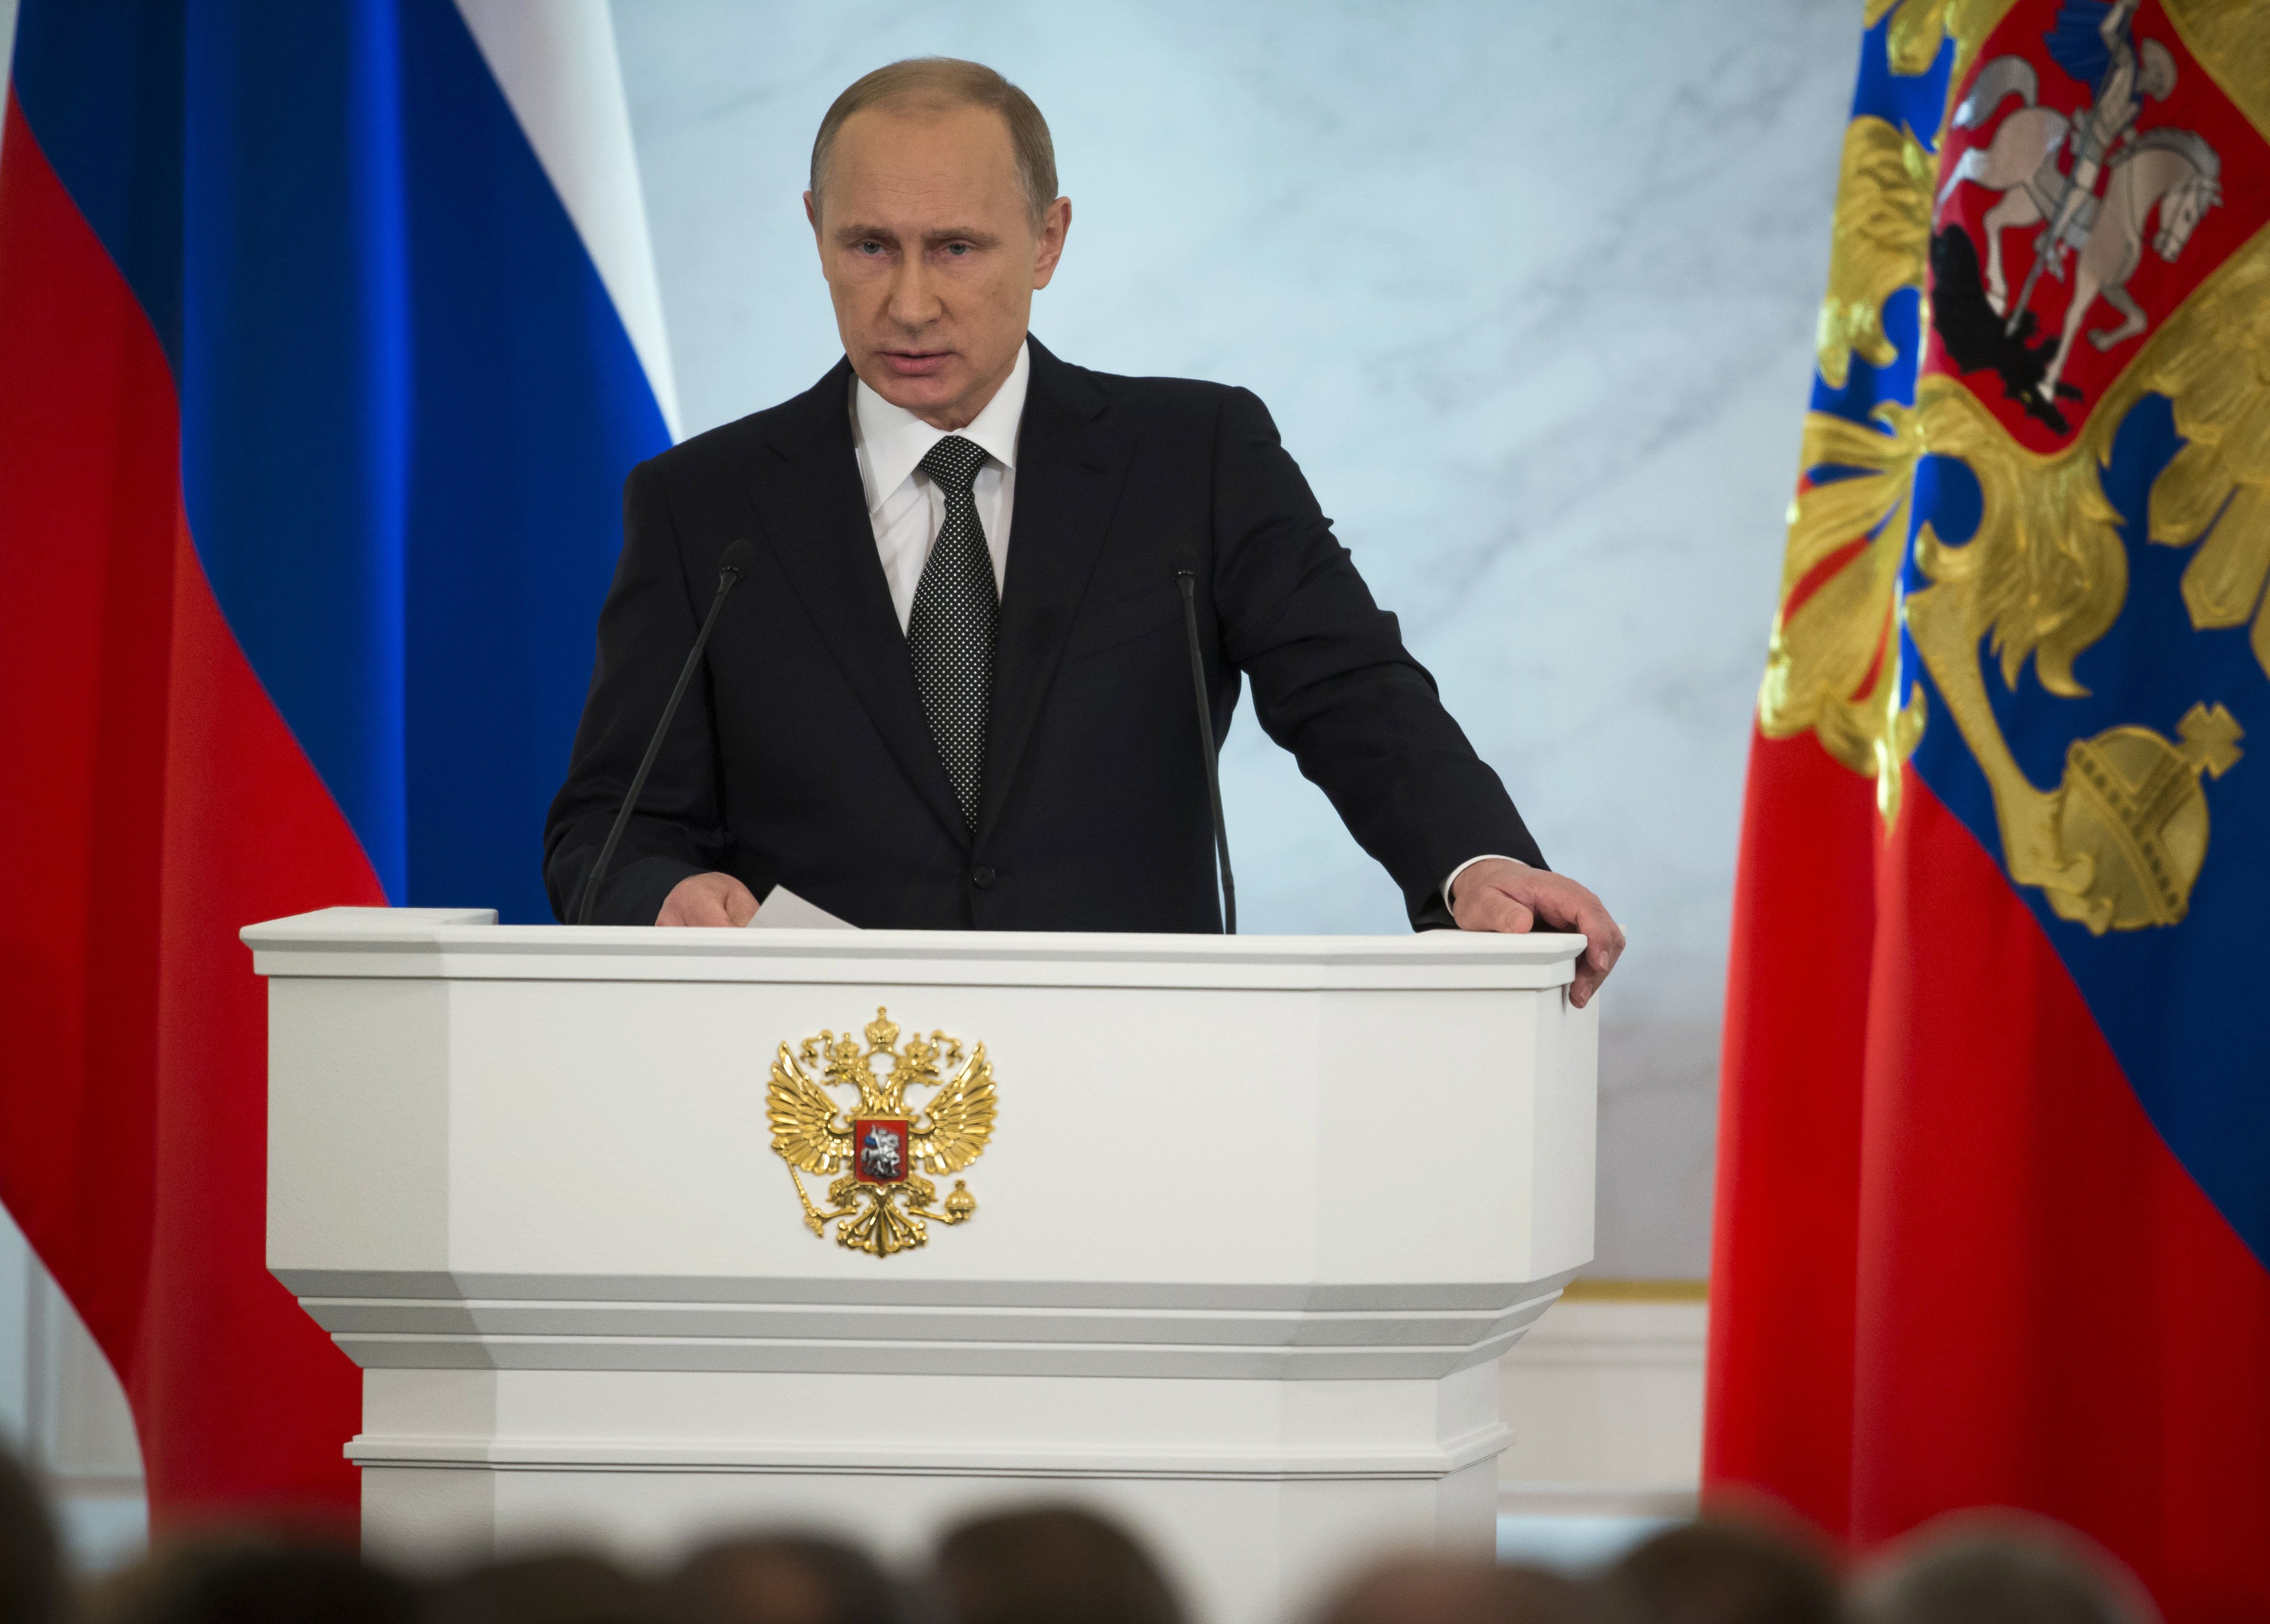 Russian President Vladimir Putin gives his annual state of the nation address in the Kremlin in Moscow on Dec. 4, 2014. (Pavel Golovkin—AP)